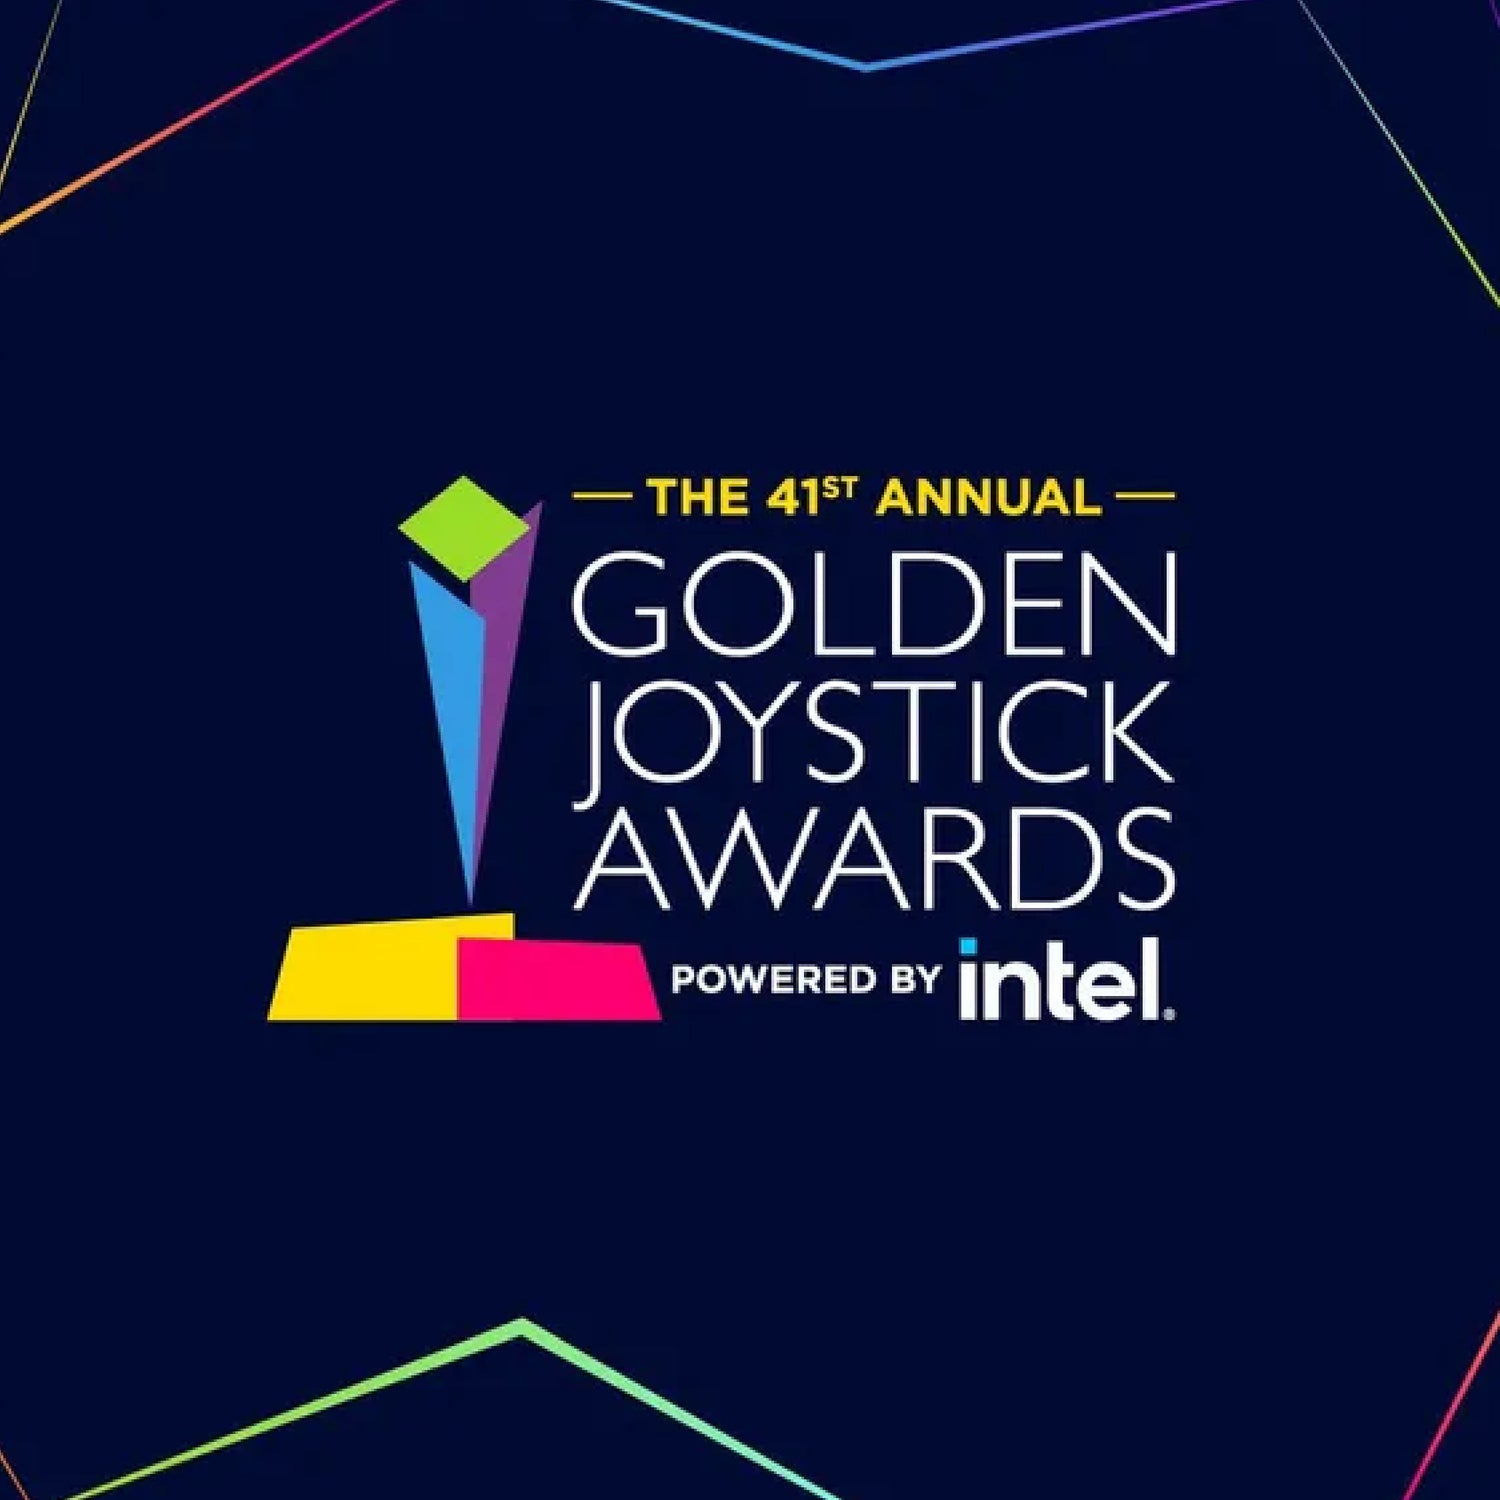 CRKD Nominated for a Golden Joystick Award: Your Vote Matters!